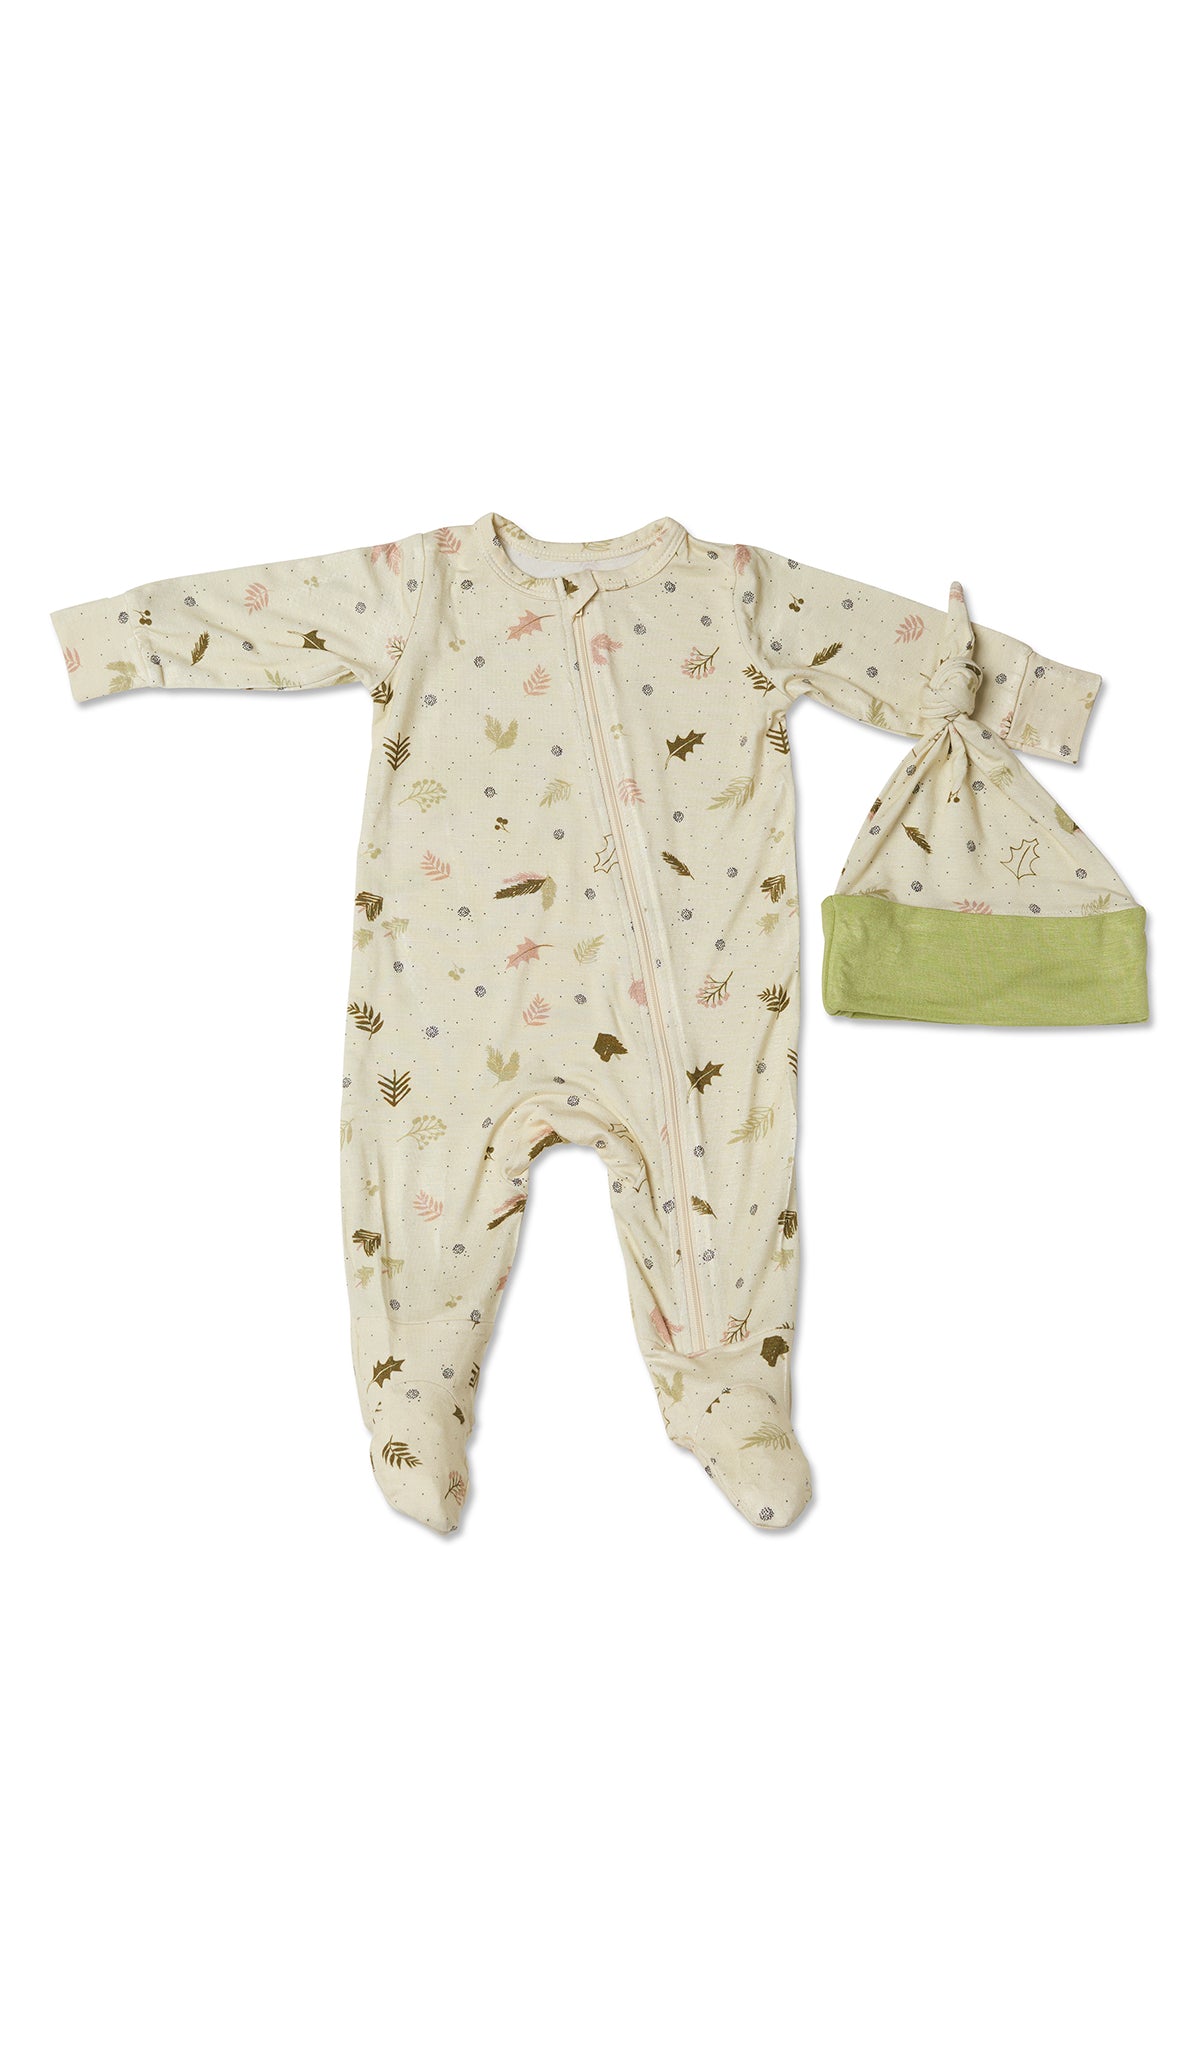 Nature Footie 2-Piece with long sleeves, zip front and matching knotted baby hat.